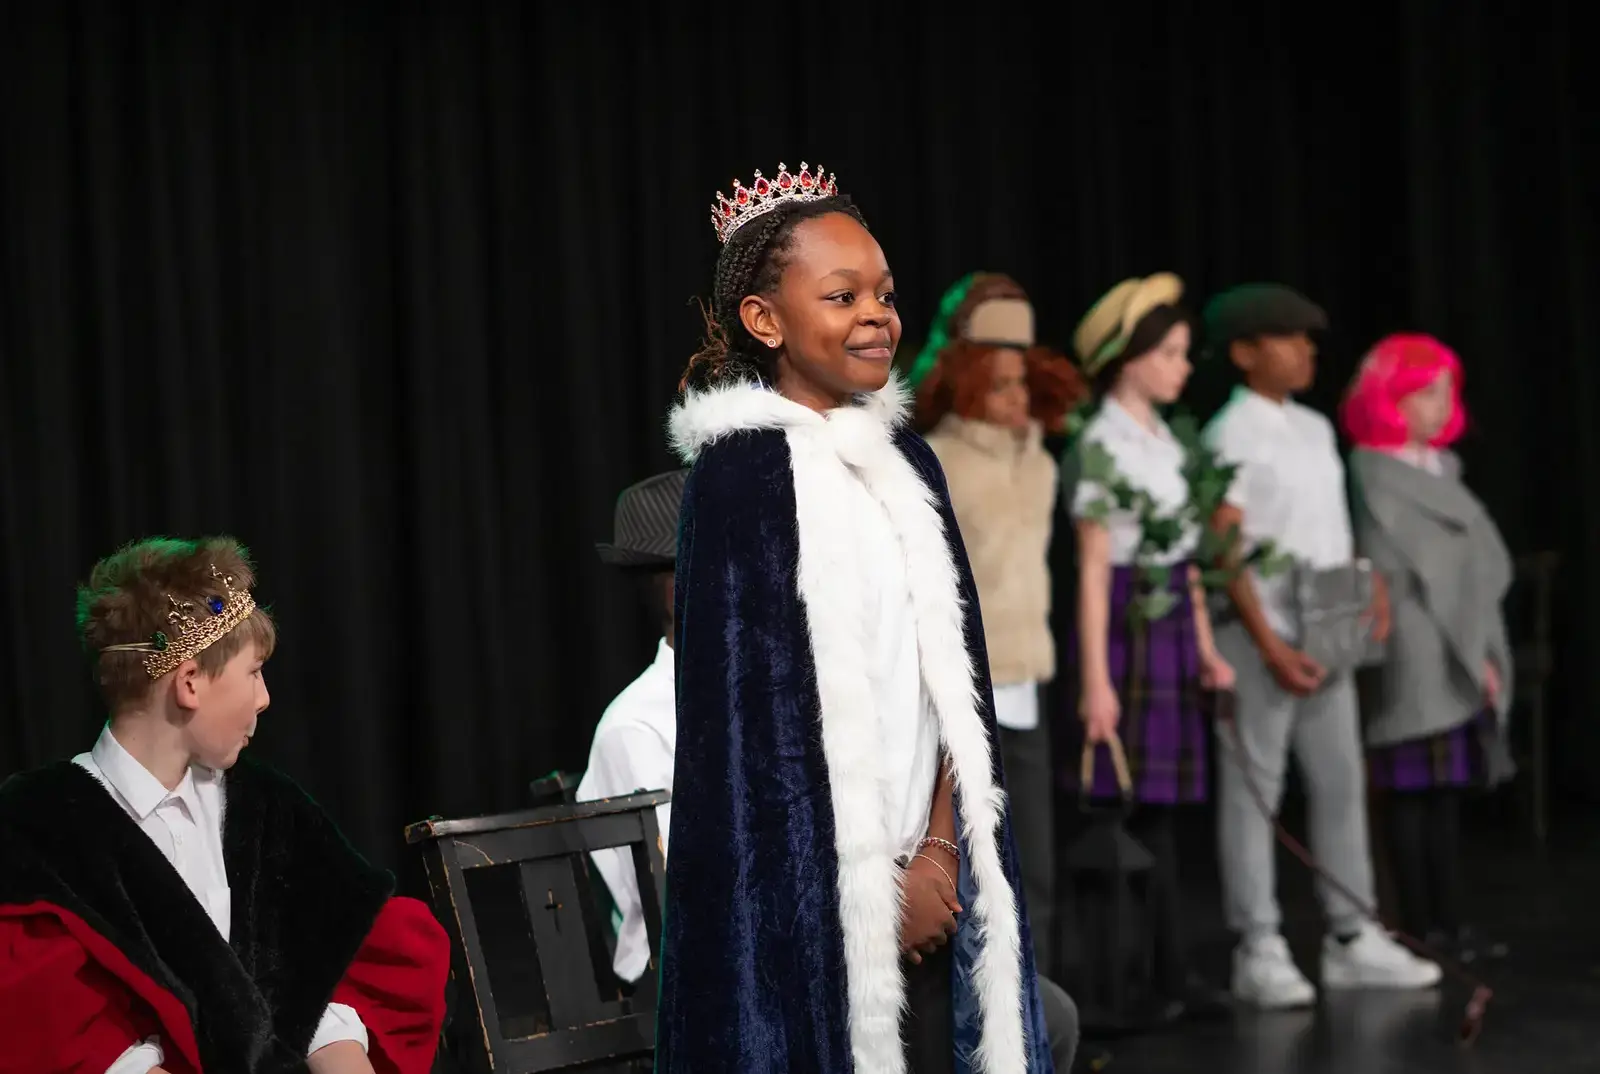 King's Magna pupil performing on stage in a dramatic production at Queen Ethelburga's Collegiate